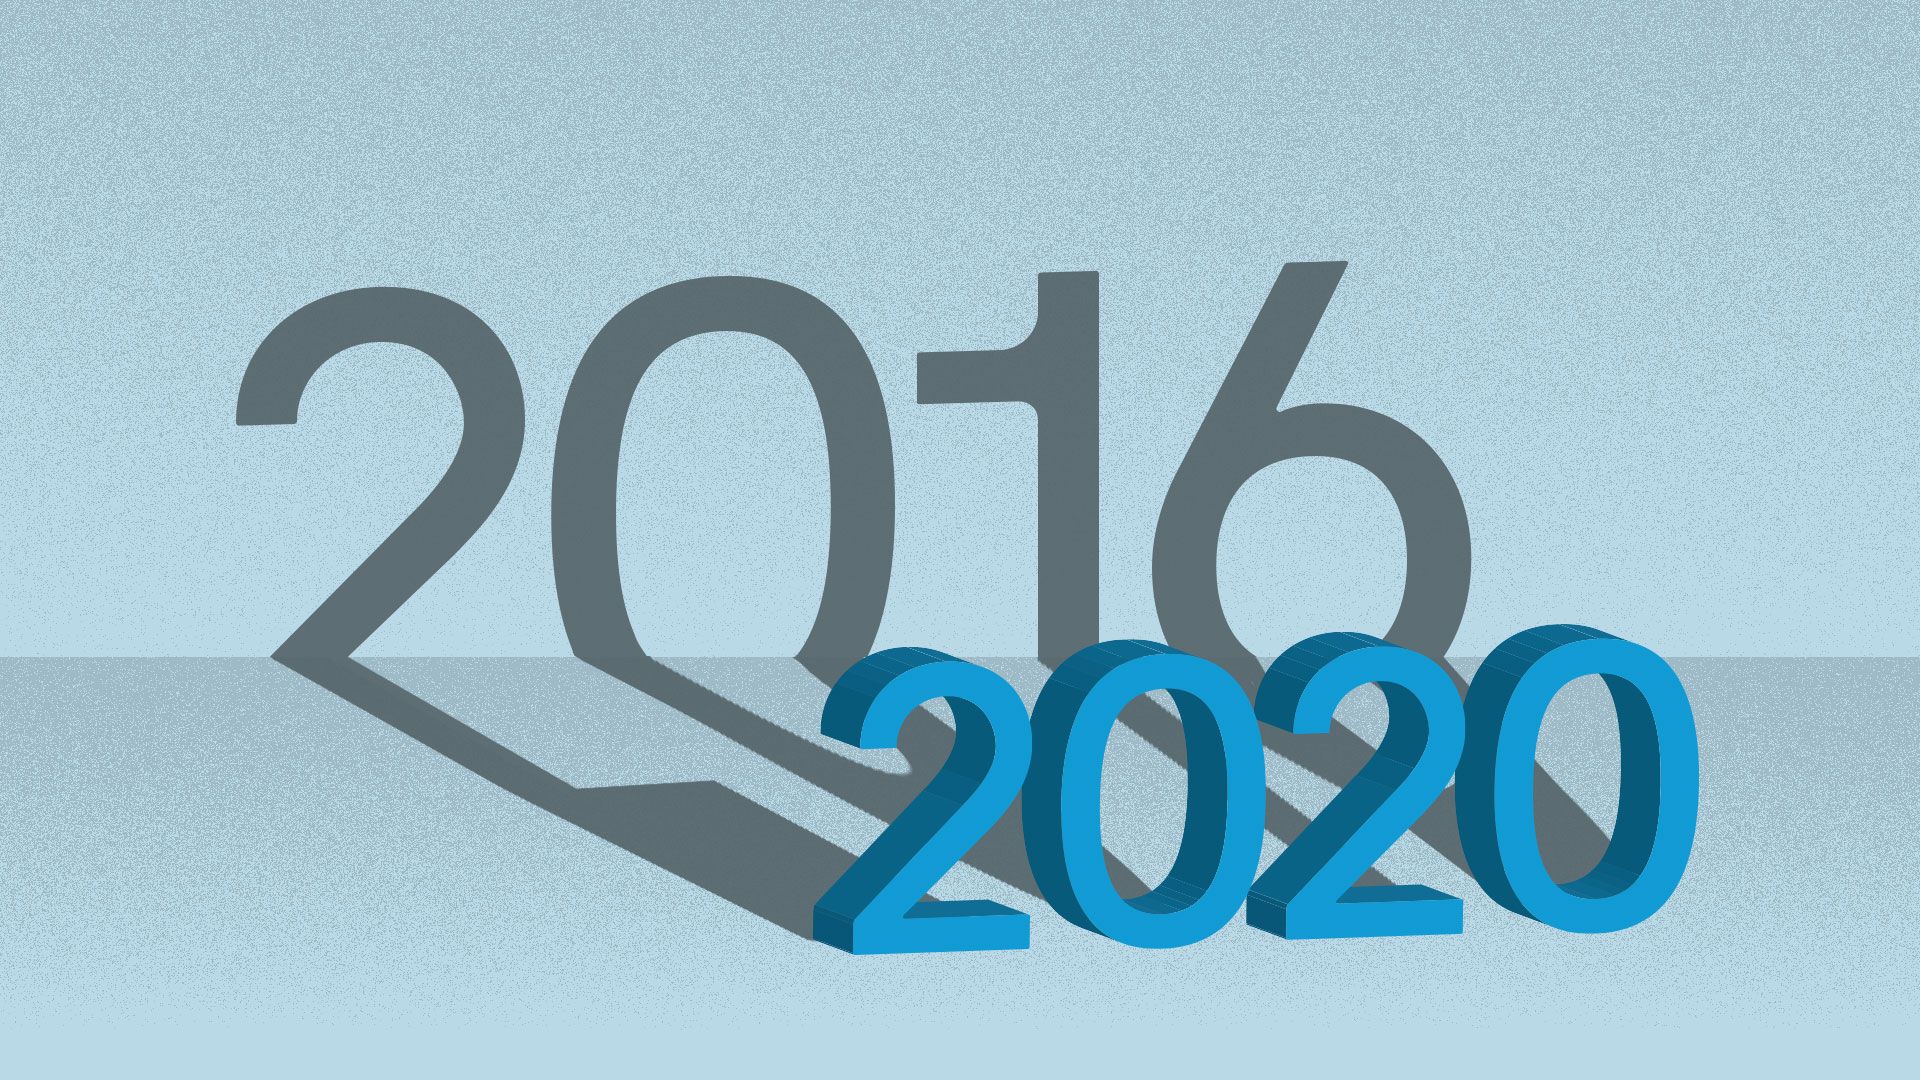 Illustration of 2020 in large letters casting a shadow that reads 2016. 